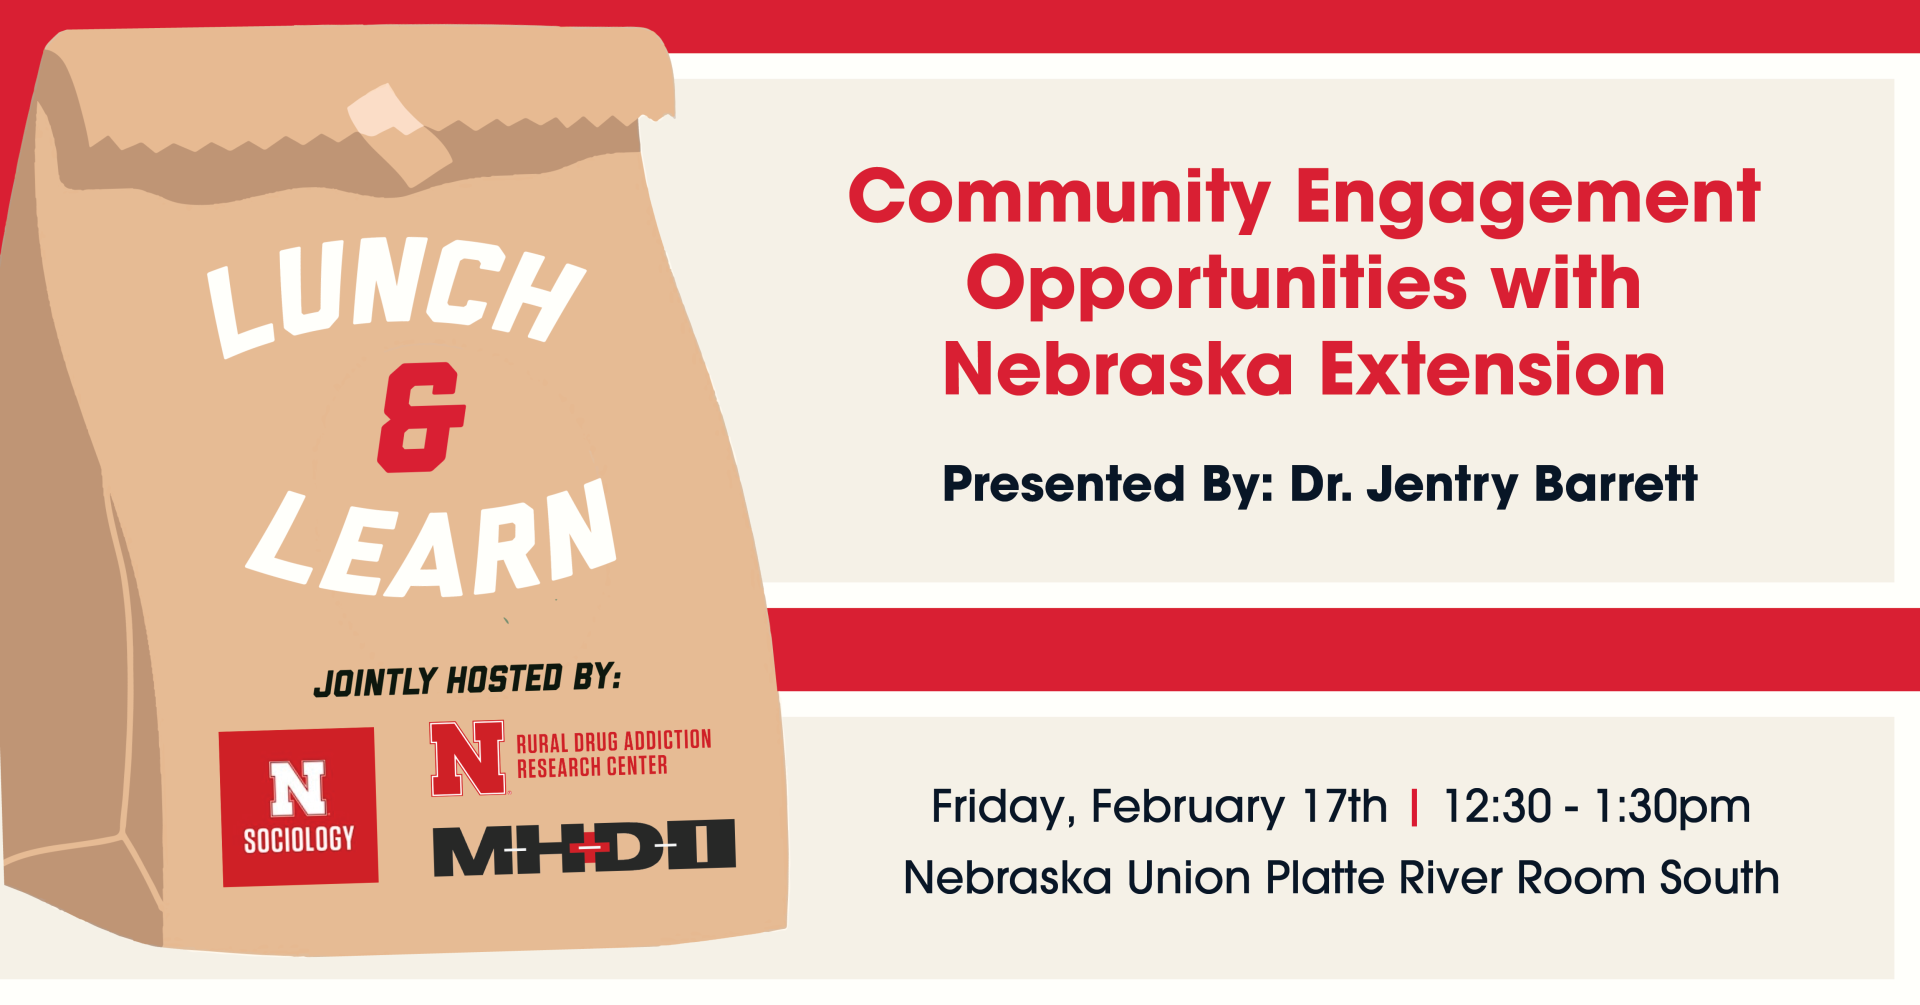 Lunch & Learn on Community Engagement Opportunities with NE Extension